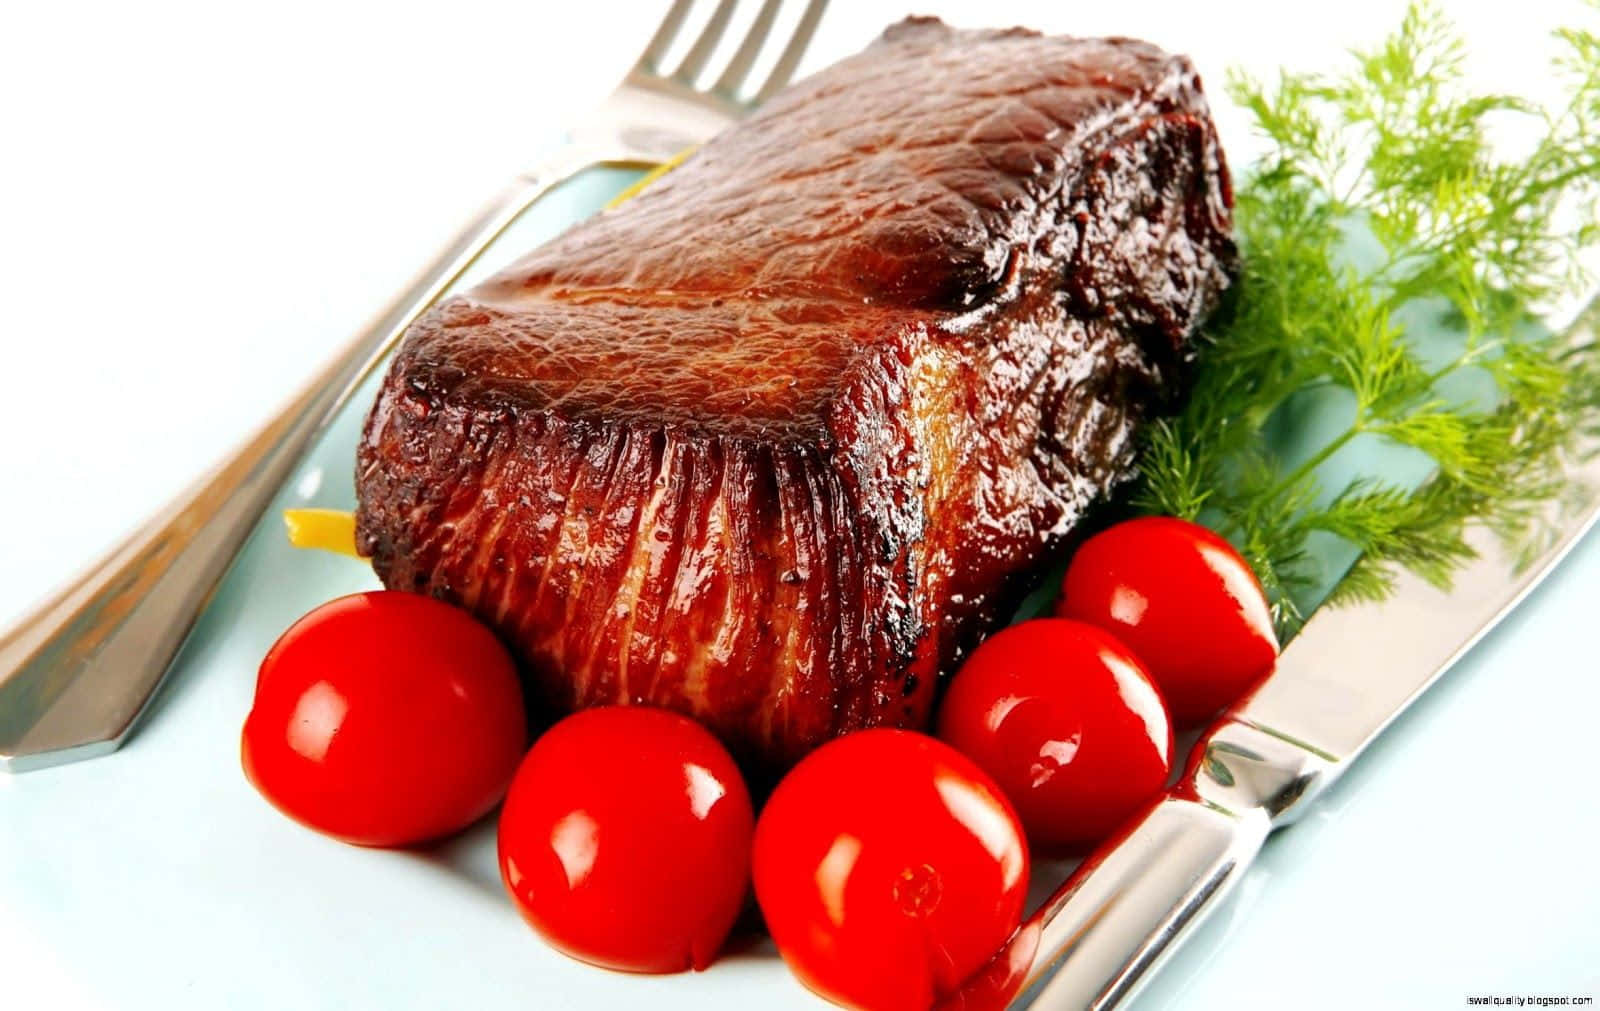 A Steak With Tomatoes And A Fork On A Plate